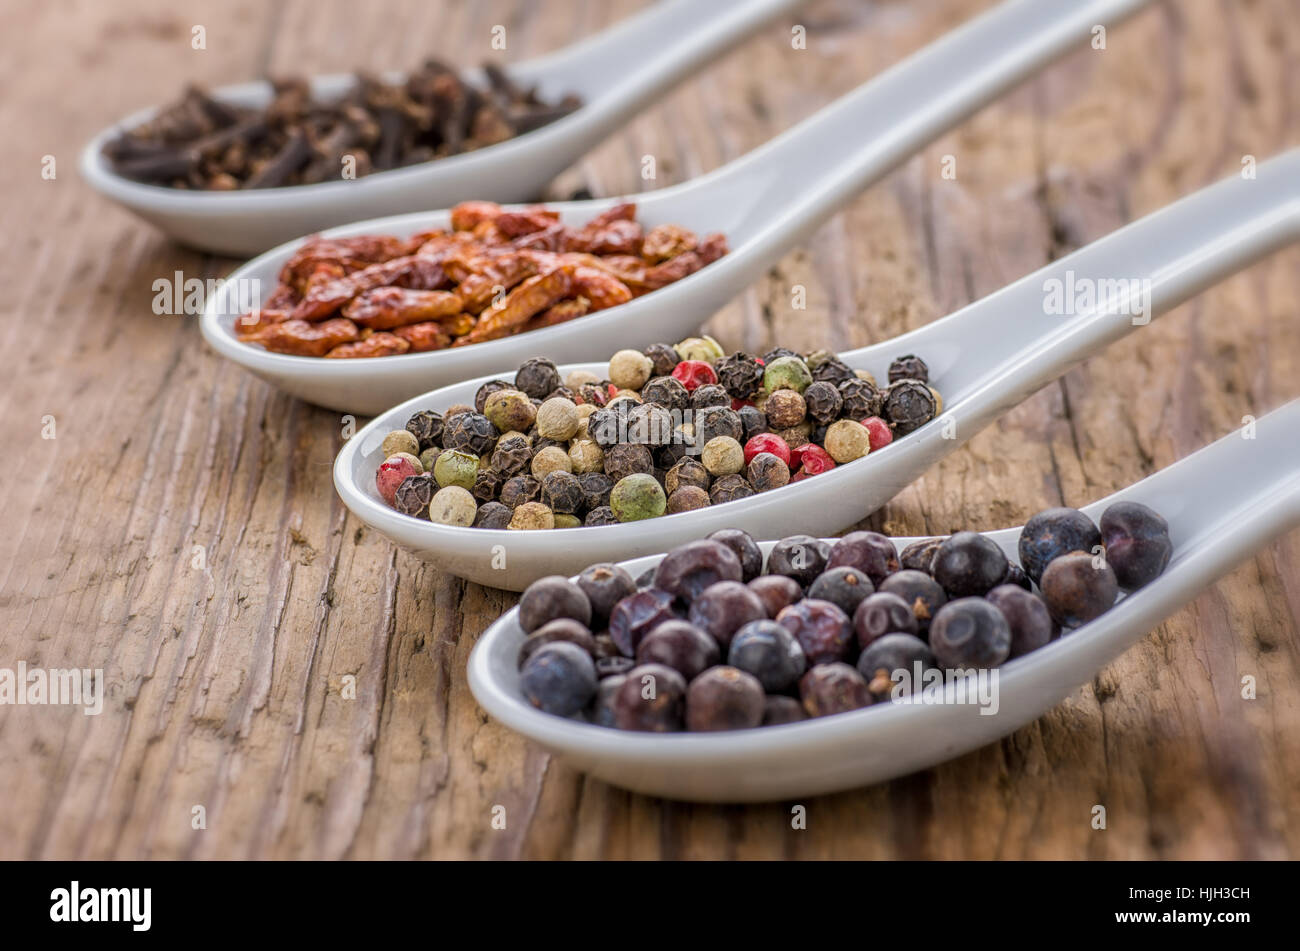 pepper, spice, spices, bowls, pinks, peel, juniper berries, chilli, chili, Stock Photo